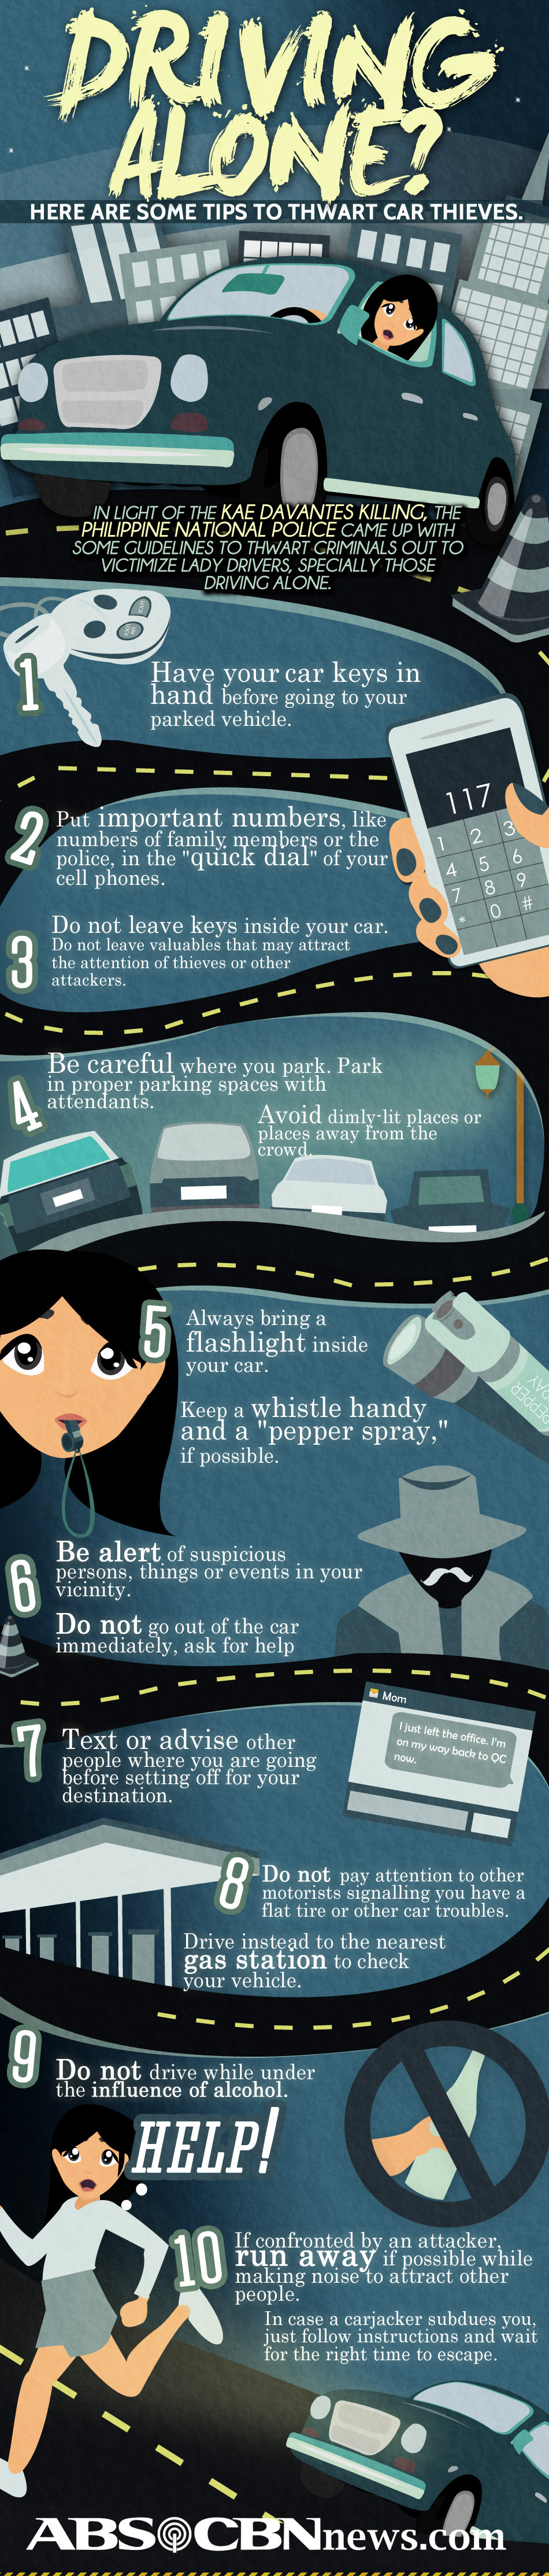 infographic safety tips